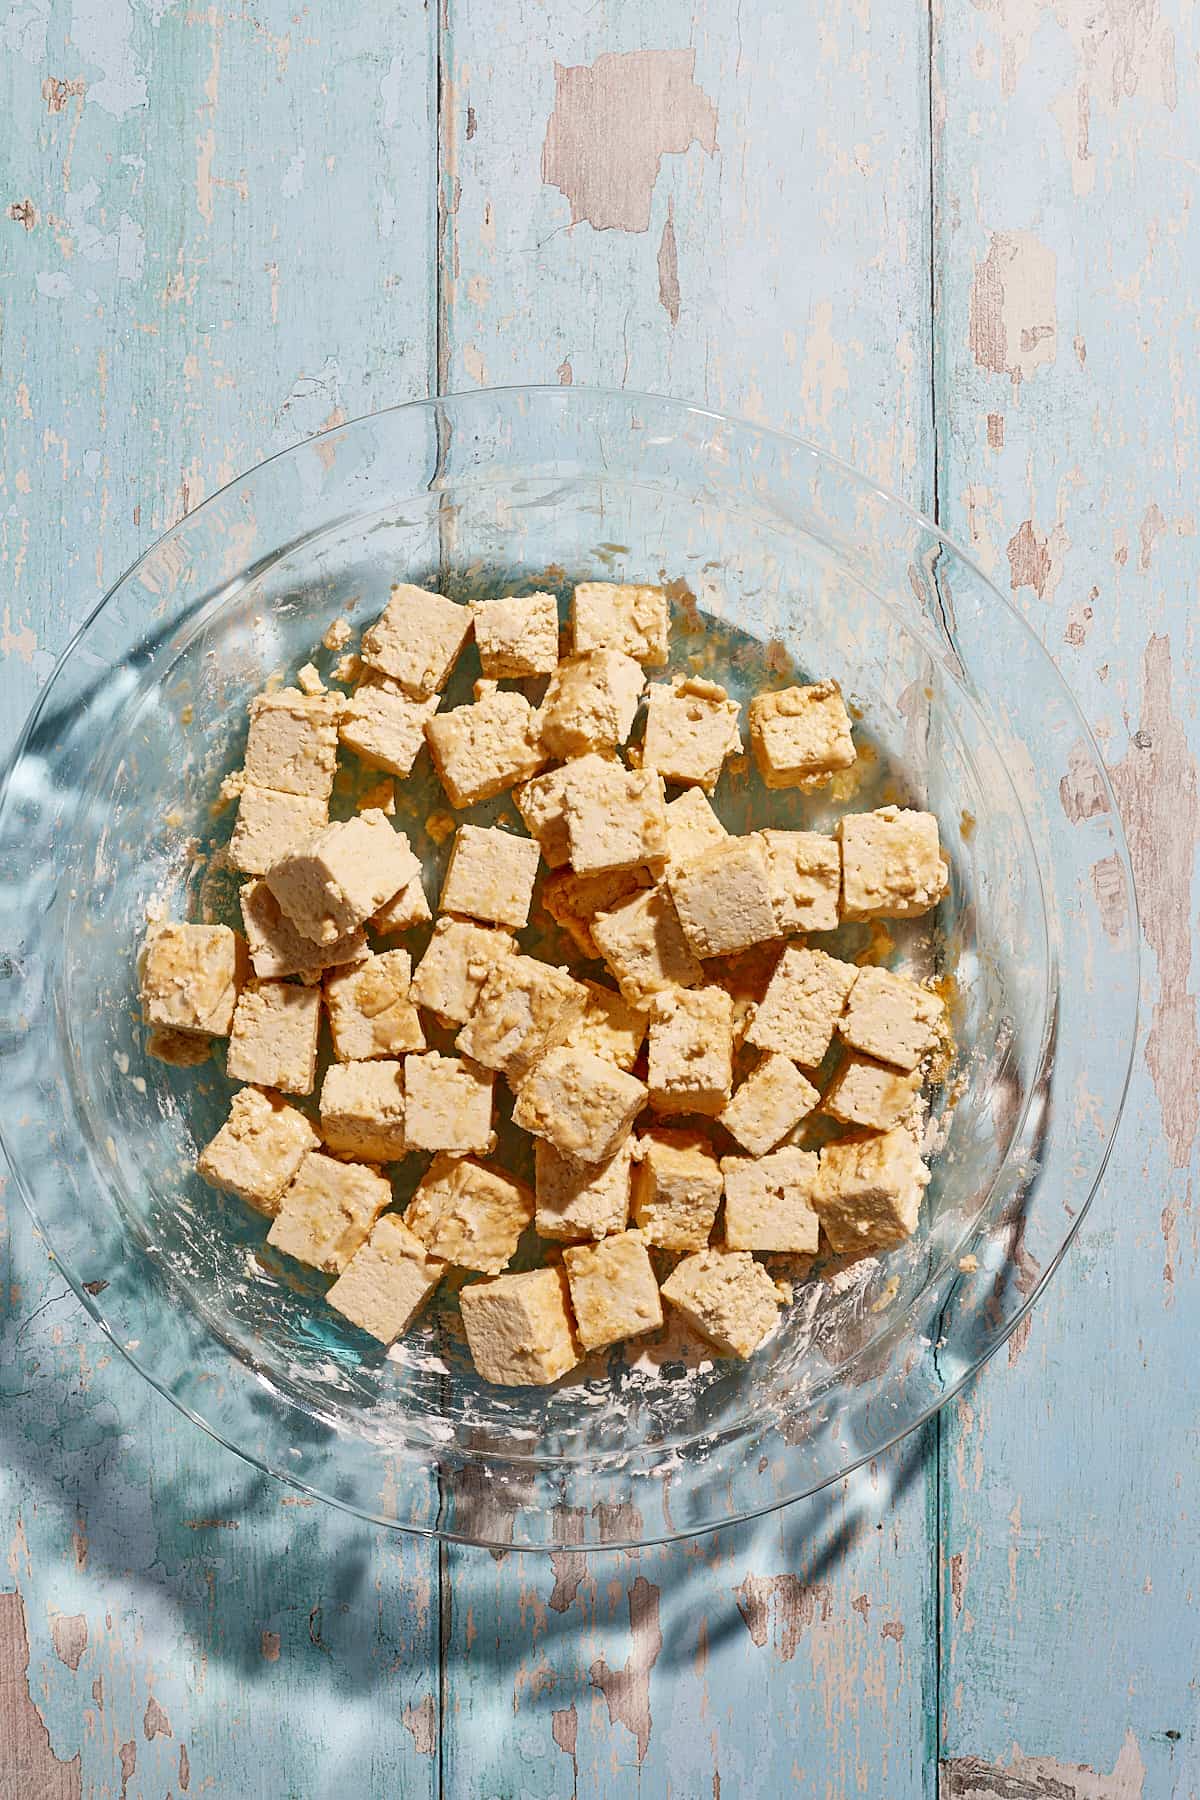 cubed tofu coated in cornstarch and ginger